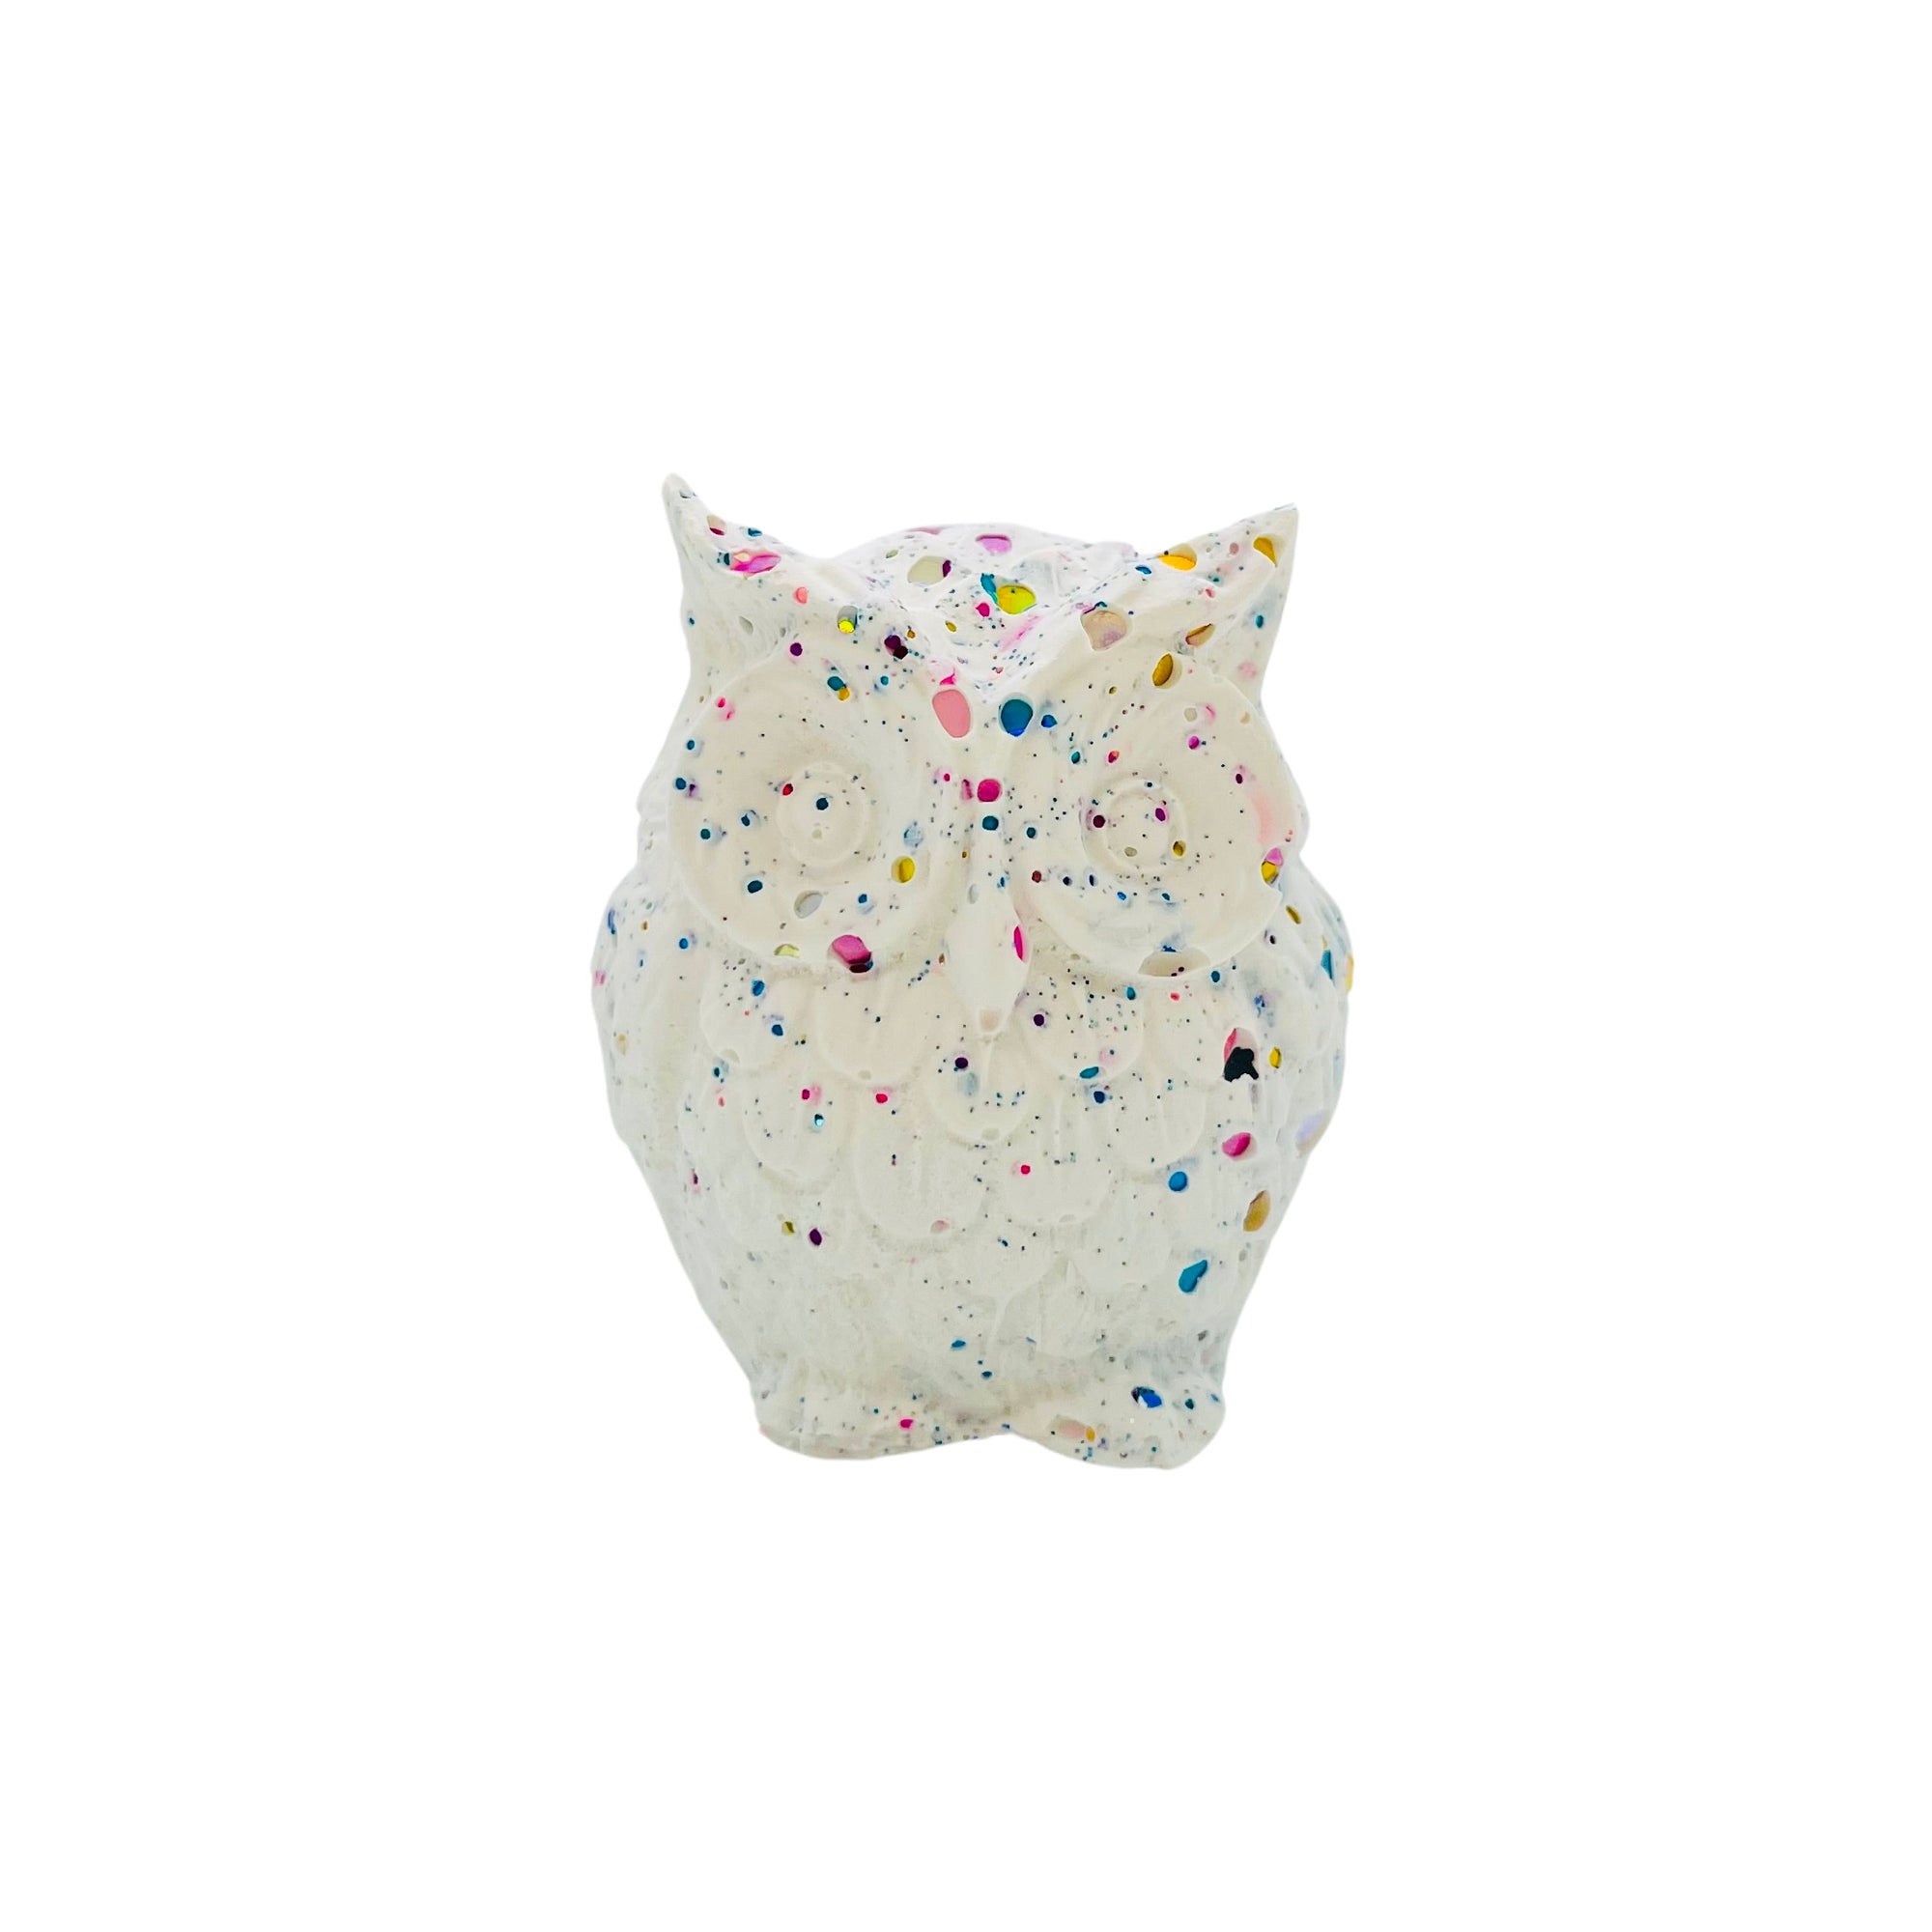 A small white owl made from Jesmonite measuring 5cm in height sprinkled with rainbow glitter.